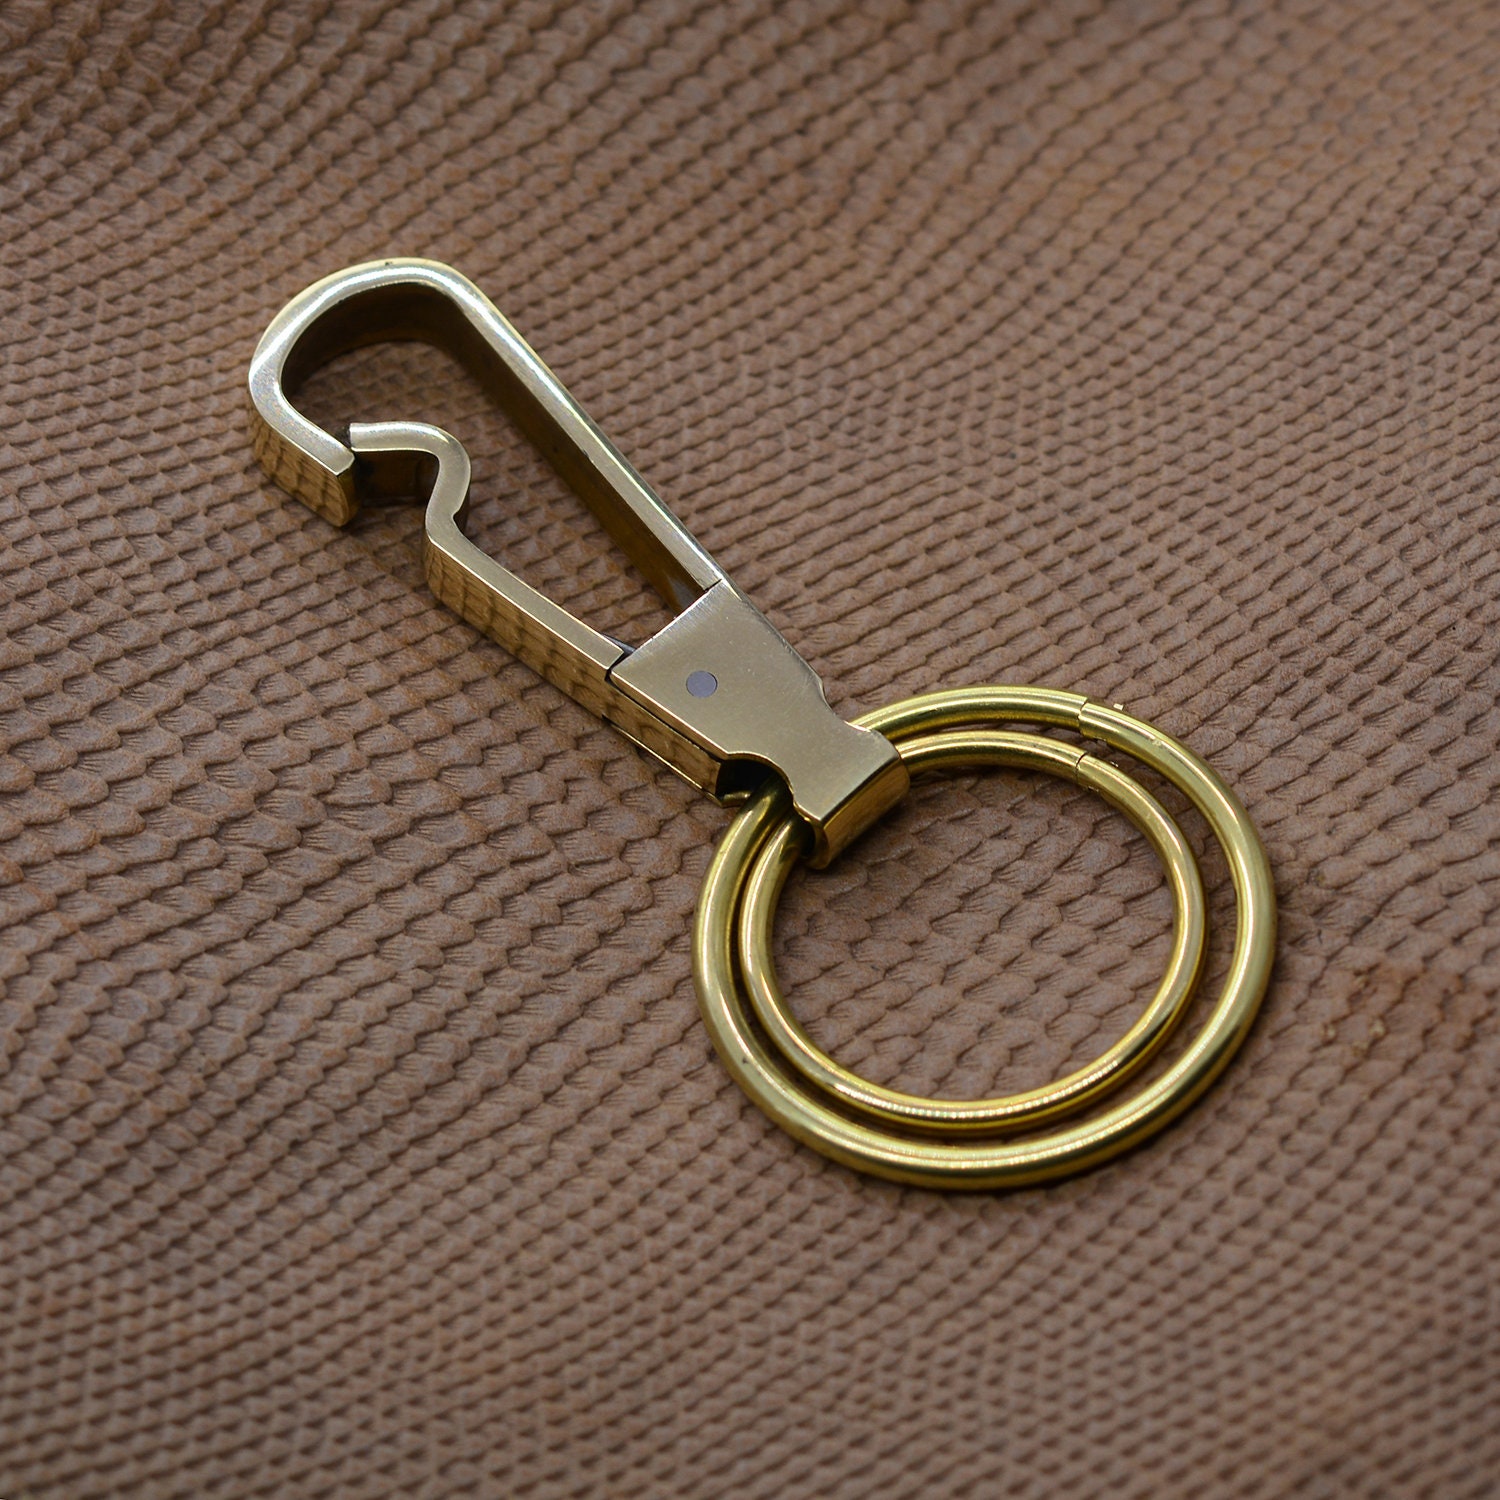 Solid Brass easy open spring Snap Hook Luxury business car Key holder Fob  Lanyard mirror polished Jump lock ring keychains